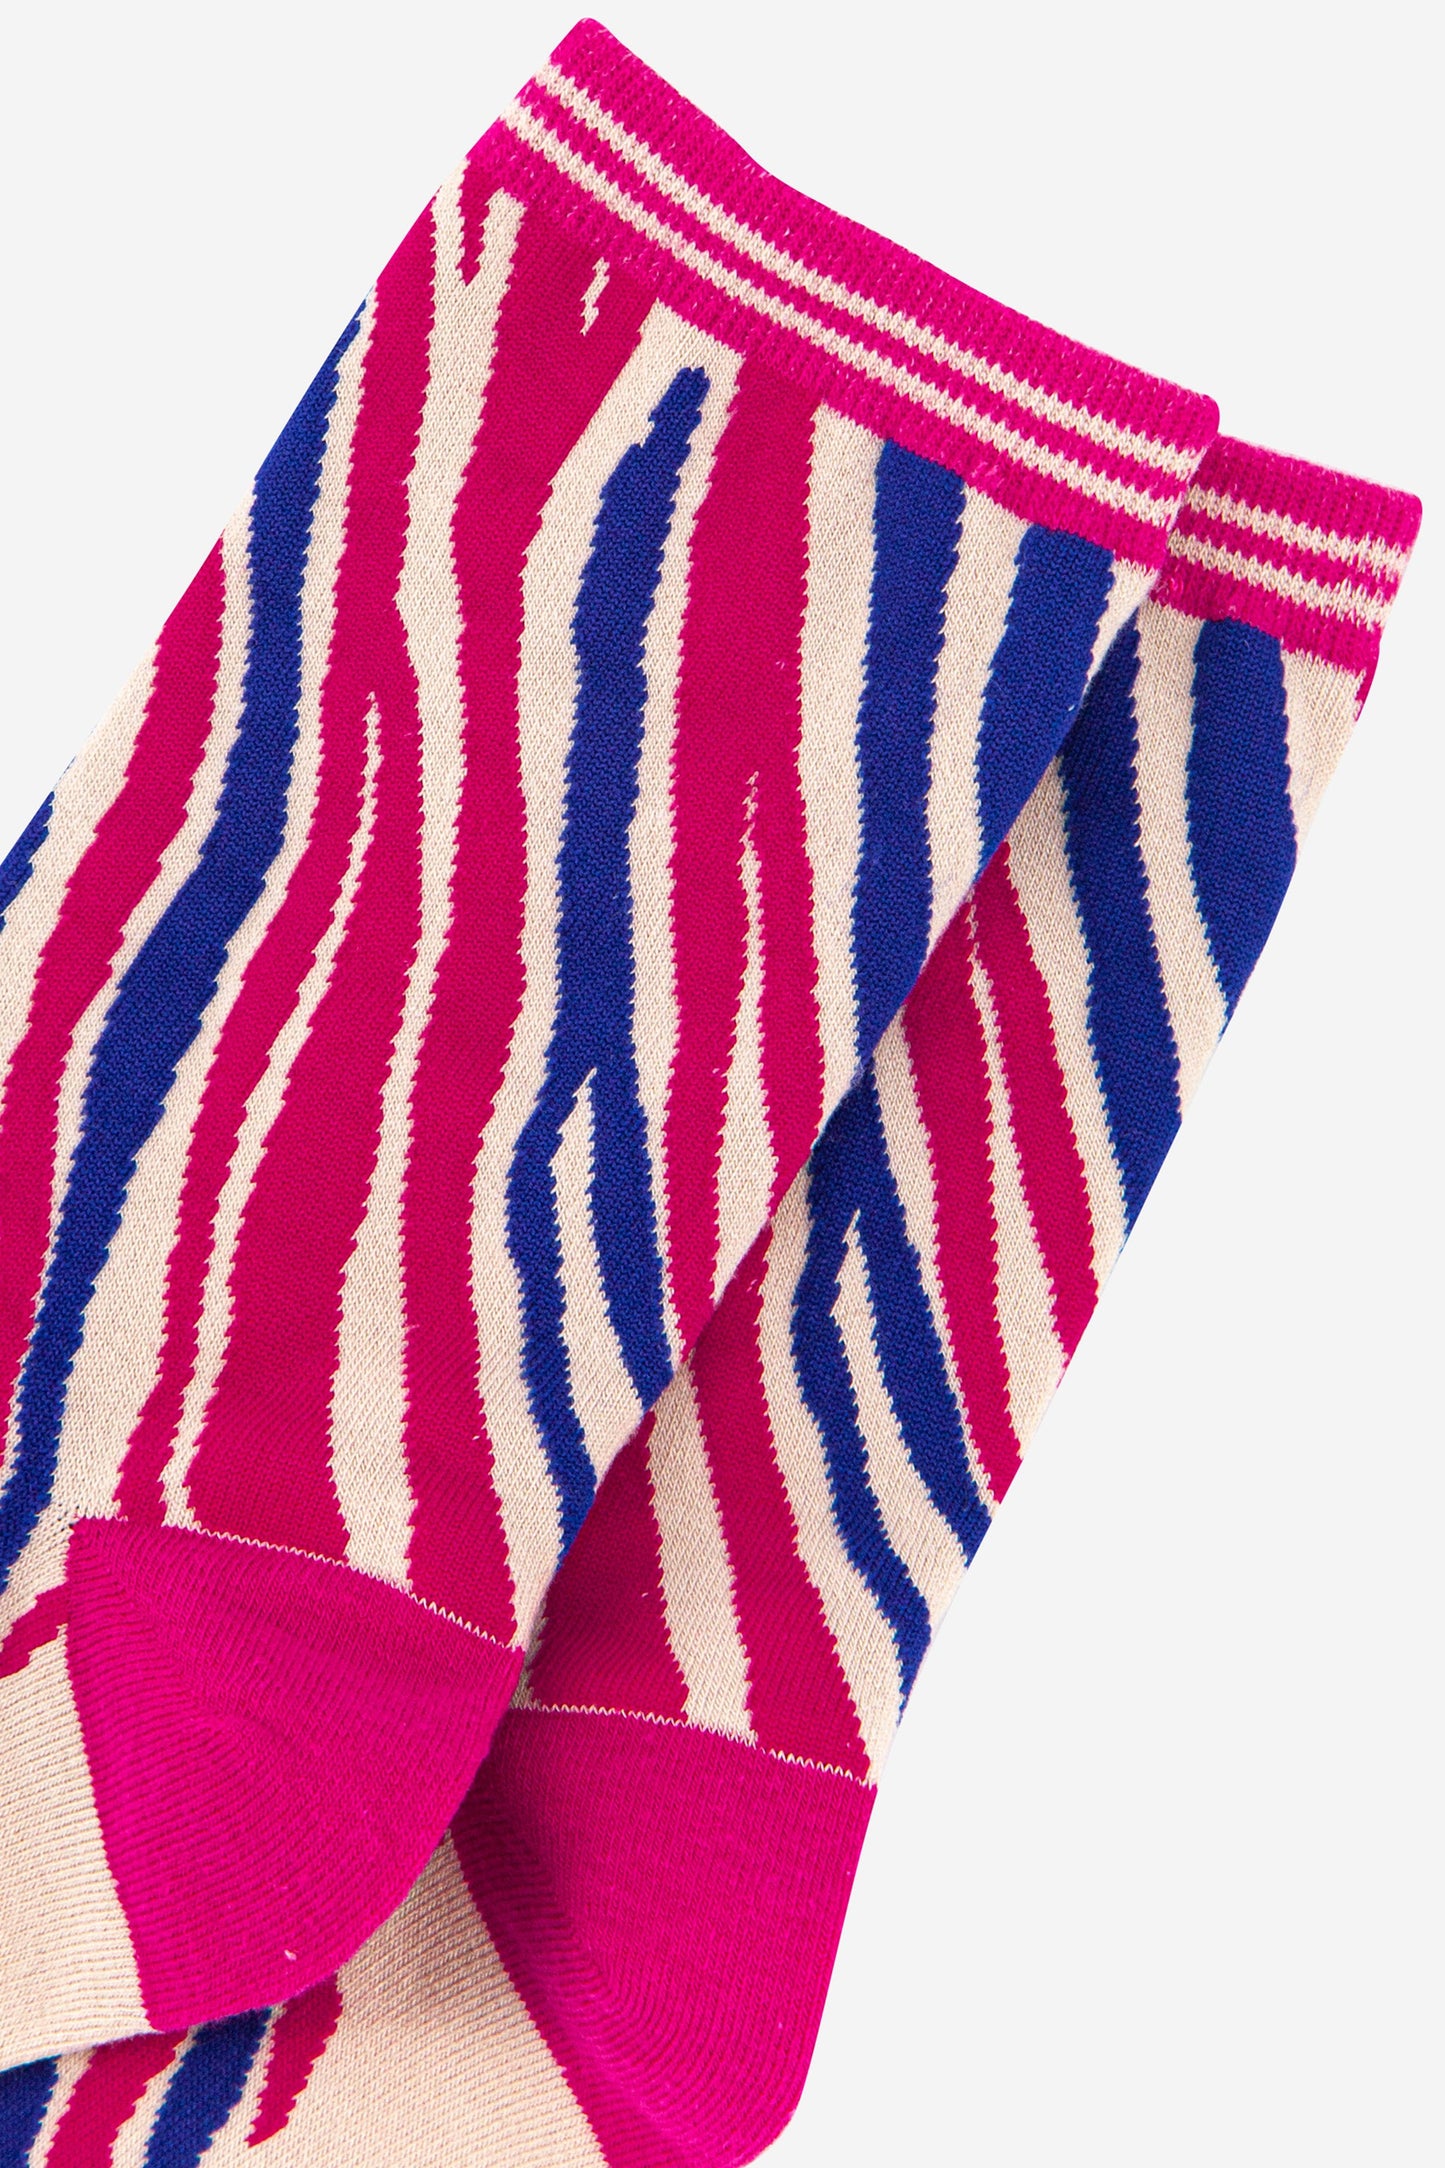 close up of the hot pink and blue zebra print pattern